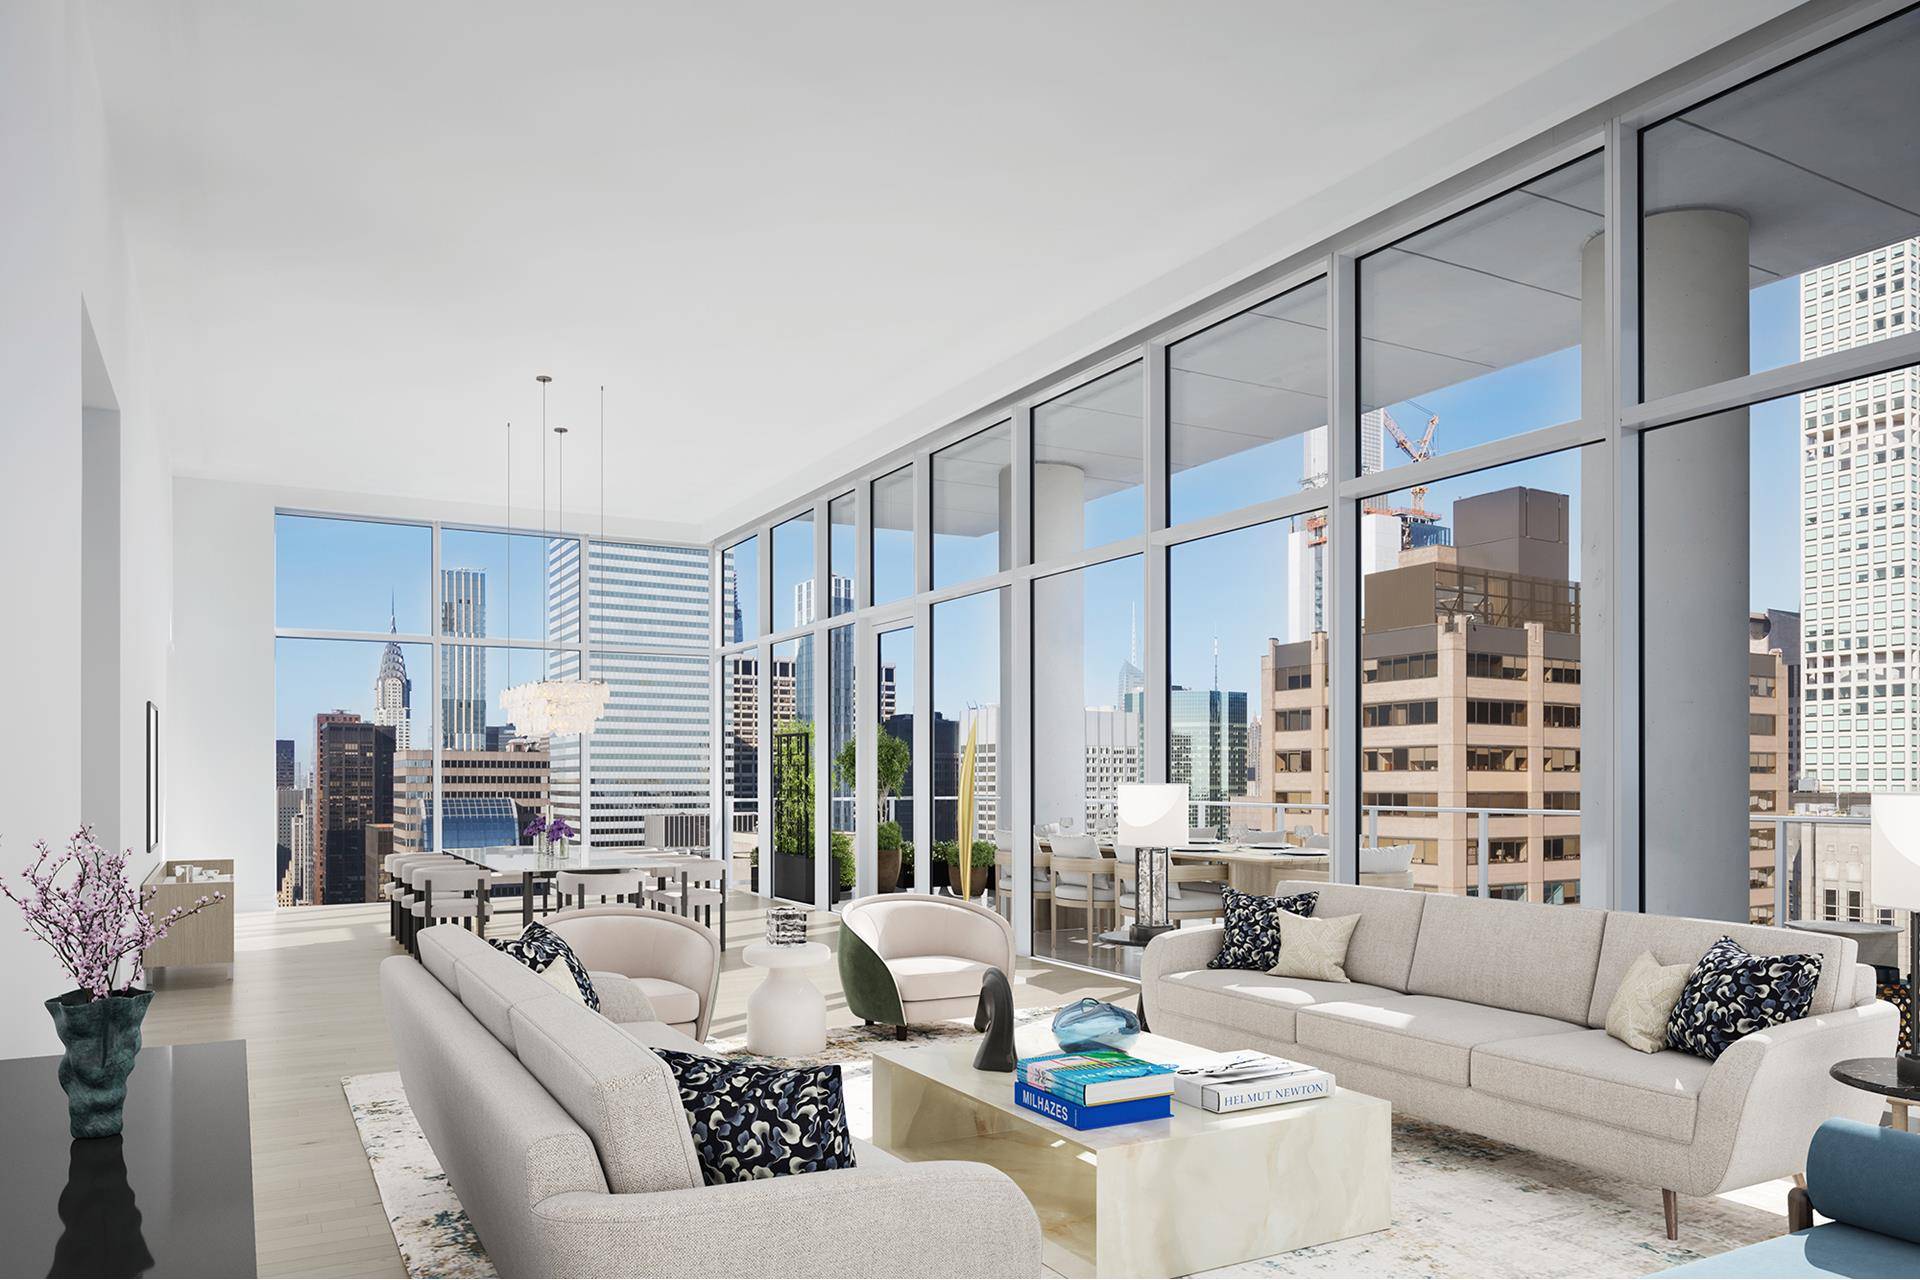 Introducing Penthouse 32, an unparalleled, three bedroom, three and a half bath full floor residence with 14' finished ceilings, and 148 linear feet of continuous terrace with 360 degree views ...